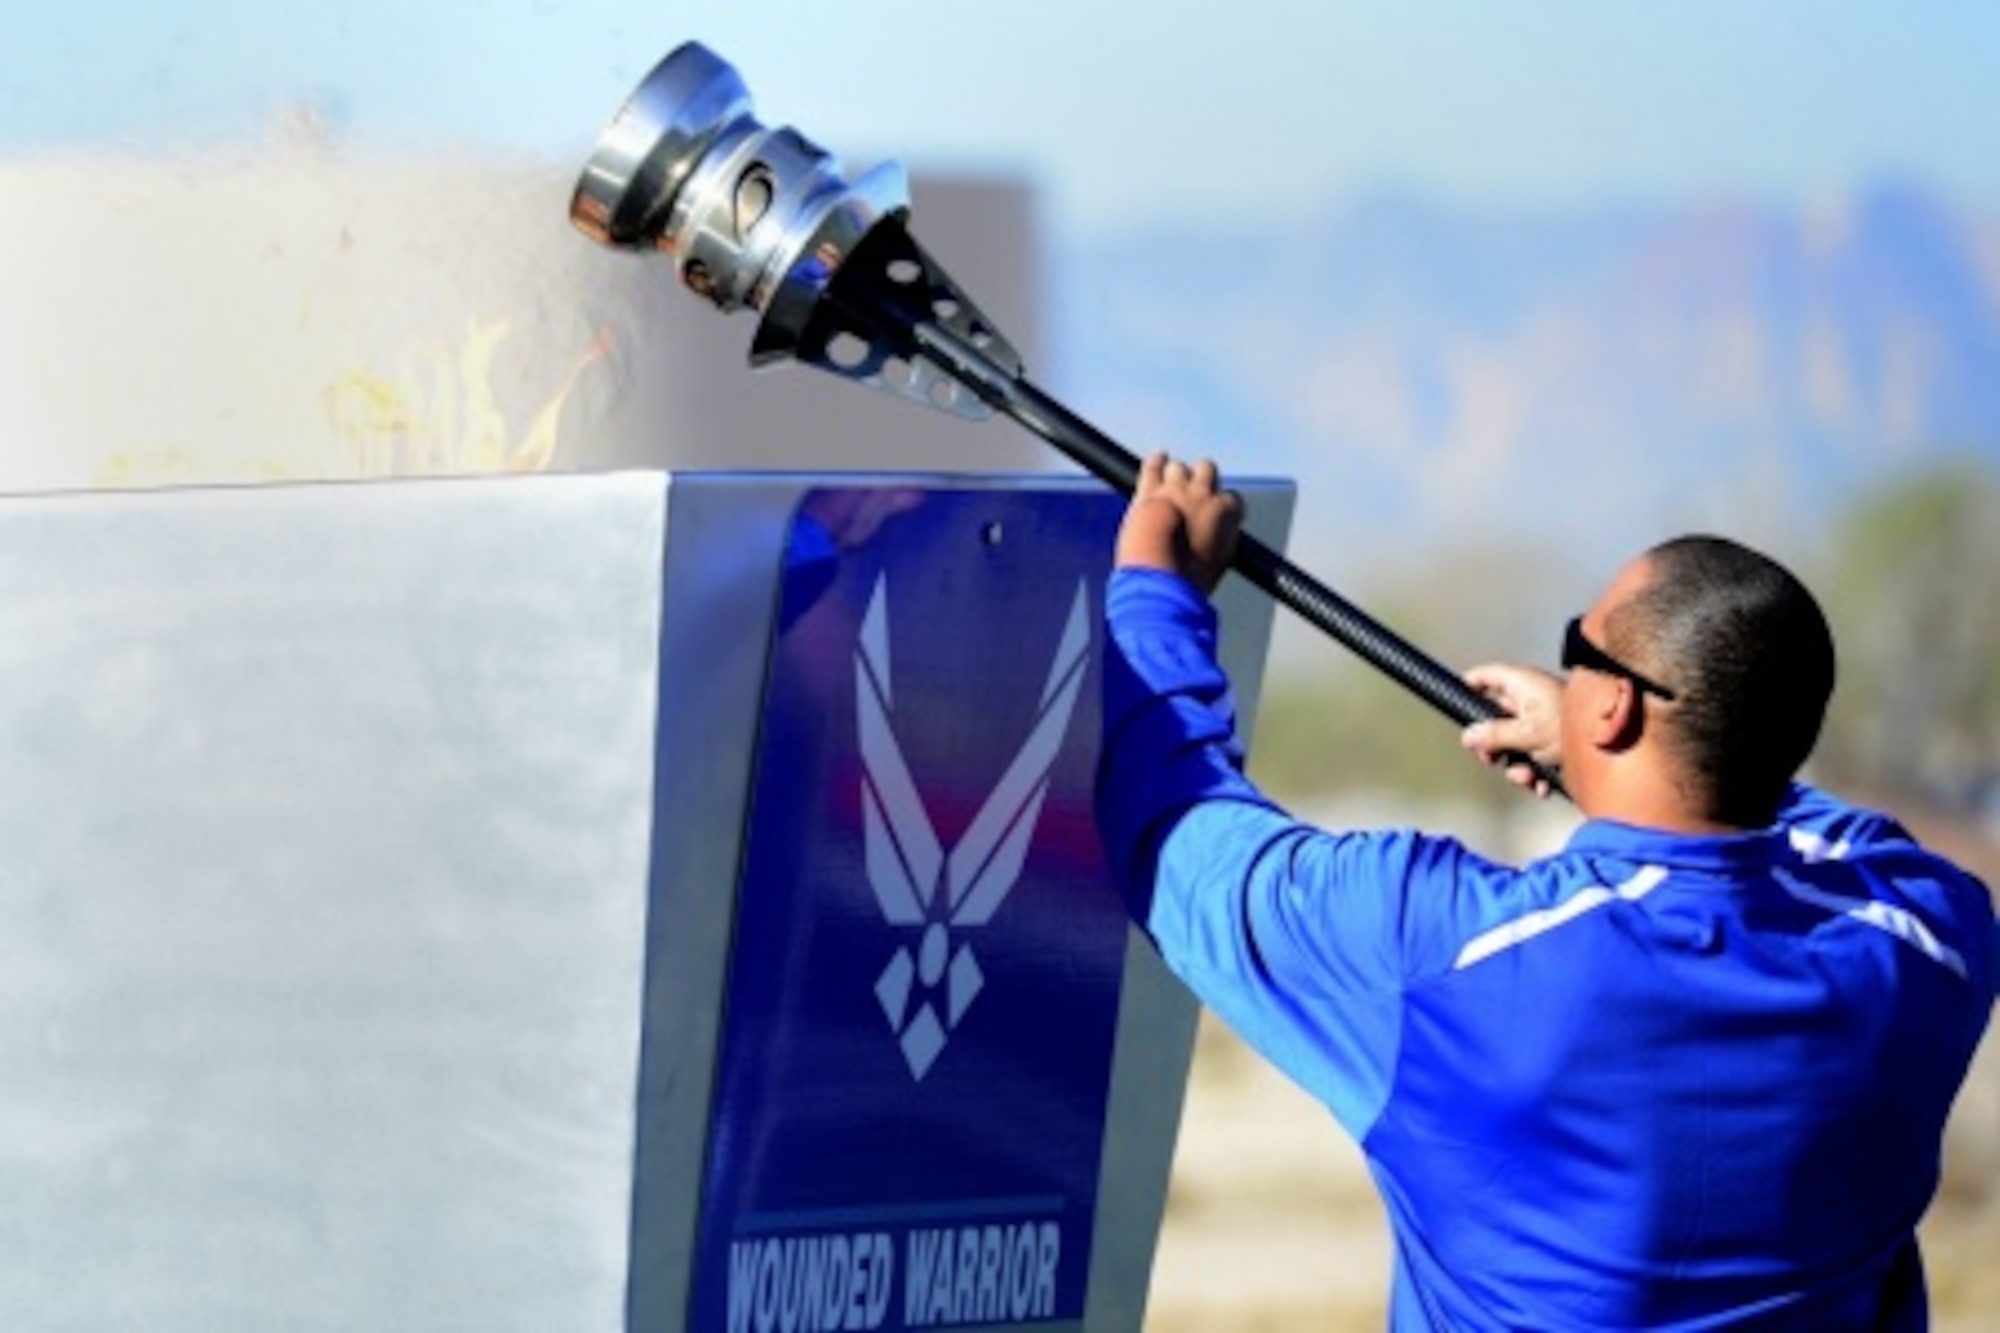 Technical Sgt. Brian Williams, Team USA Invictus Games competitor, lights the Air Force Wounded Warrior cauldron during the opening ceremony of the 2016 U.S. Air Force Trials at Nellis Air Force Base, Nev., Feb. 26. The Air Force Trials are an adaptive sports event designed to promote the mental and physical well-being of seriously wounded, ill and injured military members and veterans. More than 100 wounded, ill or injured service men and women from around the country will compete for a spot on the 2016 Warrior Games Team which will represent the Air Force at the US Military Academy at West Point in June. (U.S. Air Force photo by Staff Sgt. DeAndre Curtiss/Released)